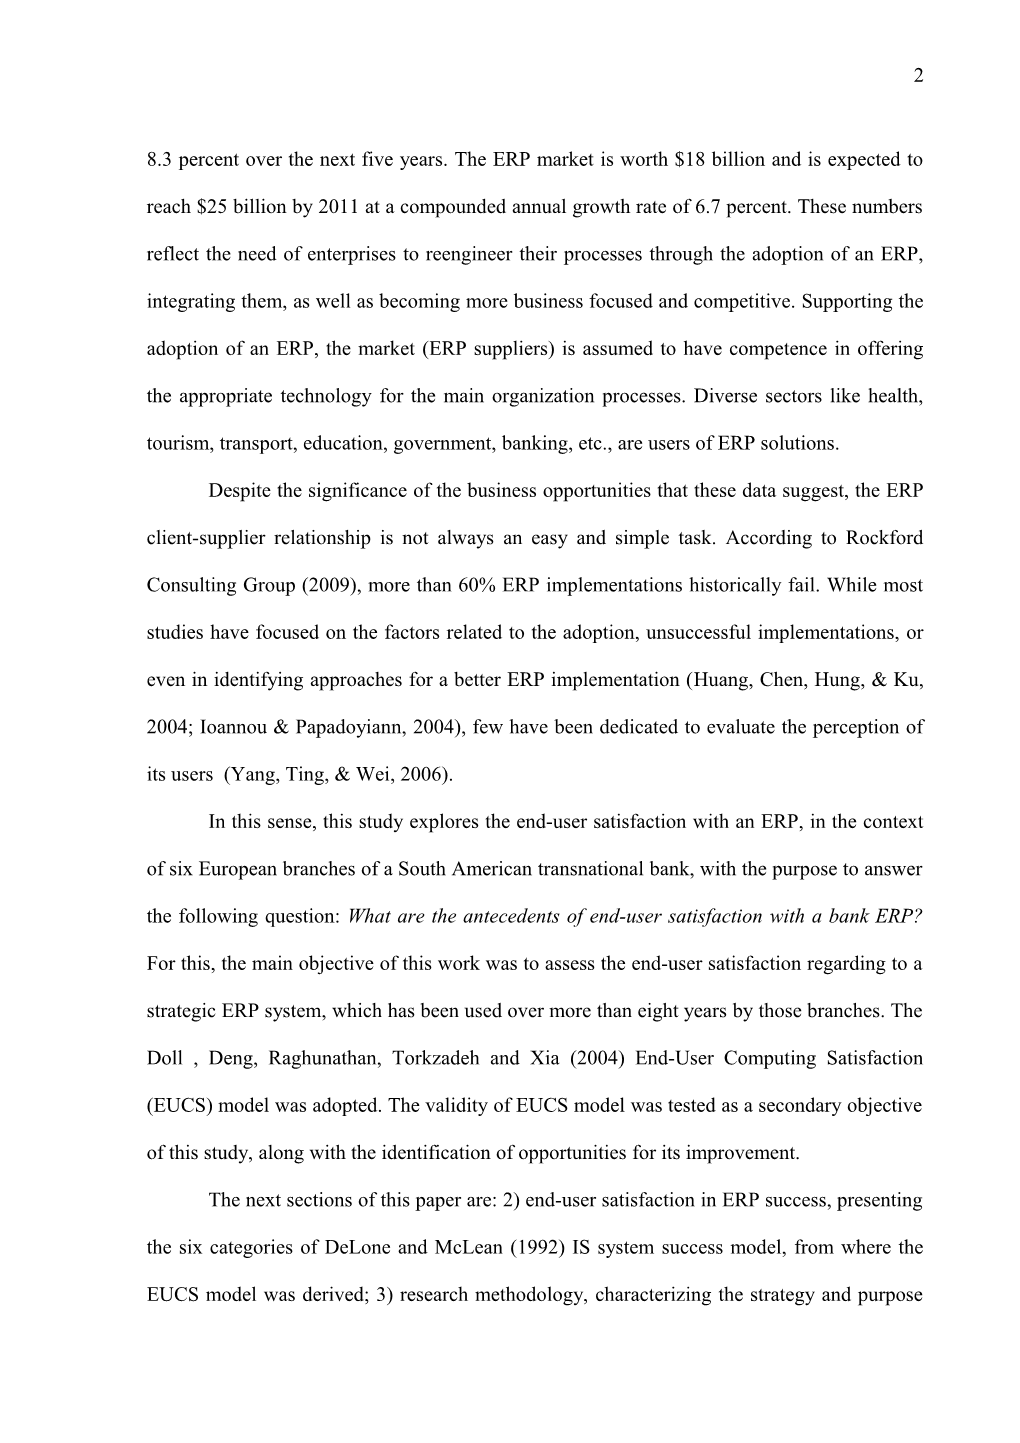 Antecedents of End-User Satisfaction with an ERP System in a Transnational Bank